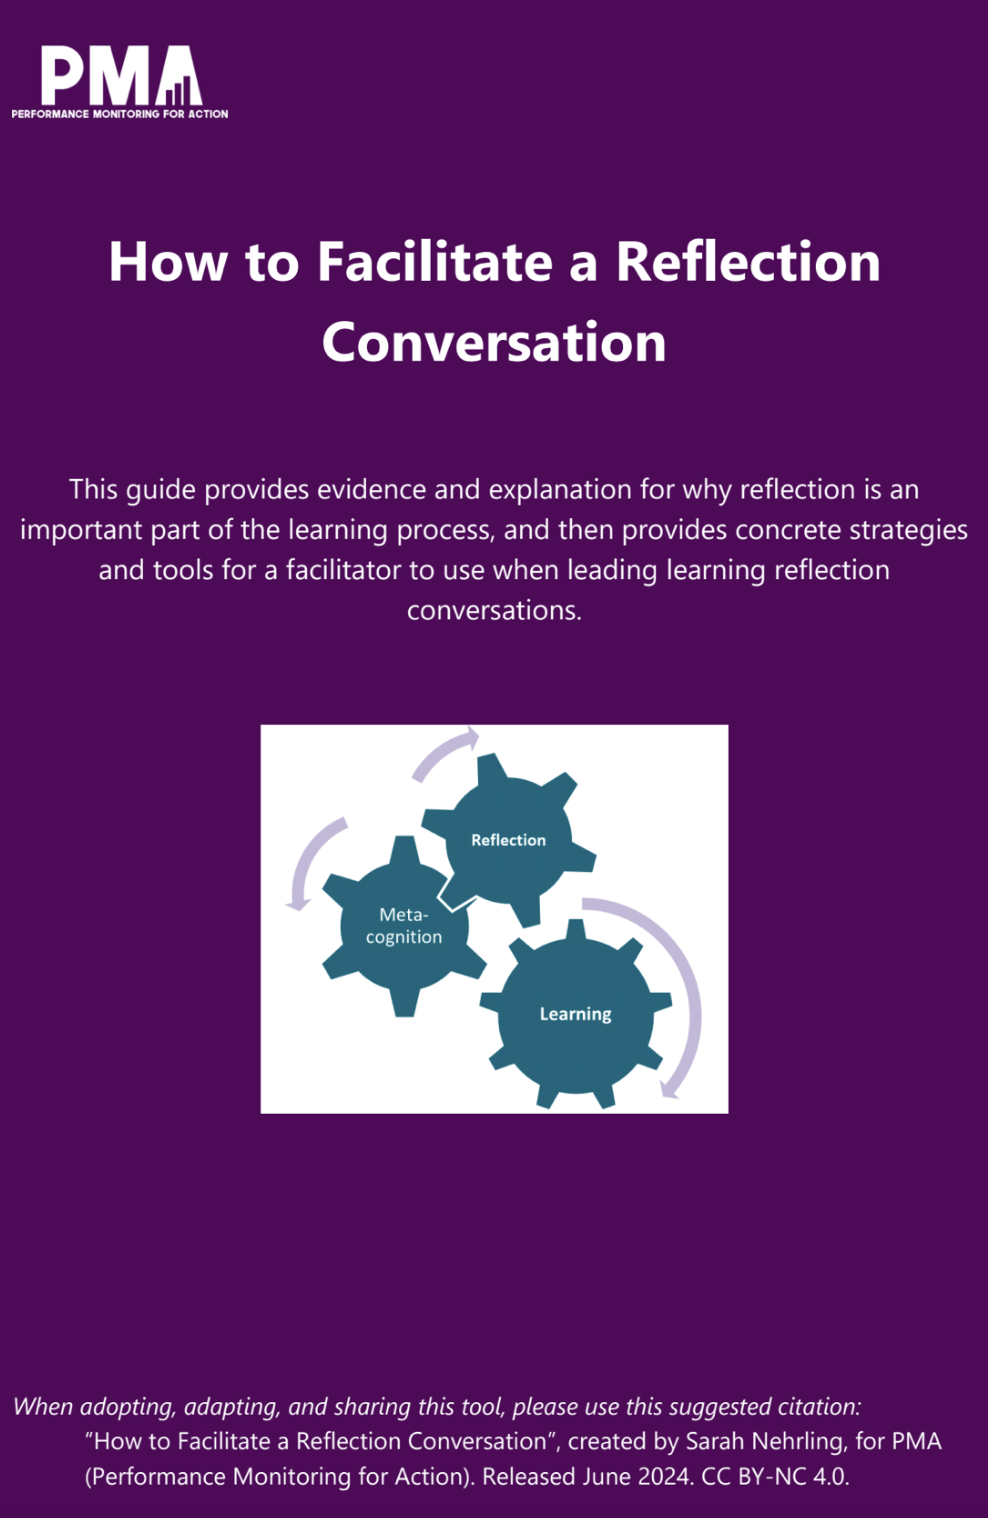 How to Facilitate a Reflection Conversation